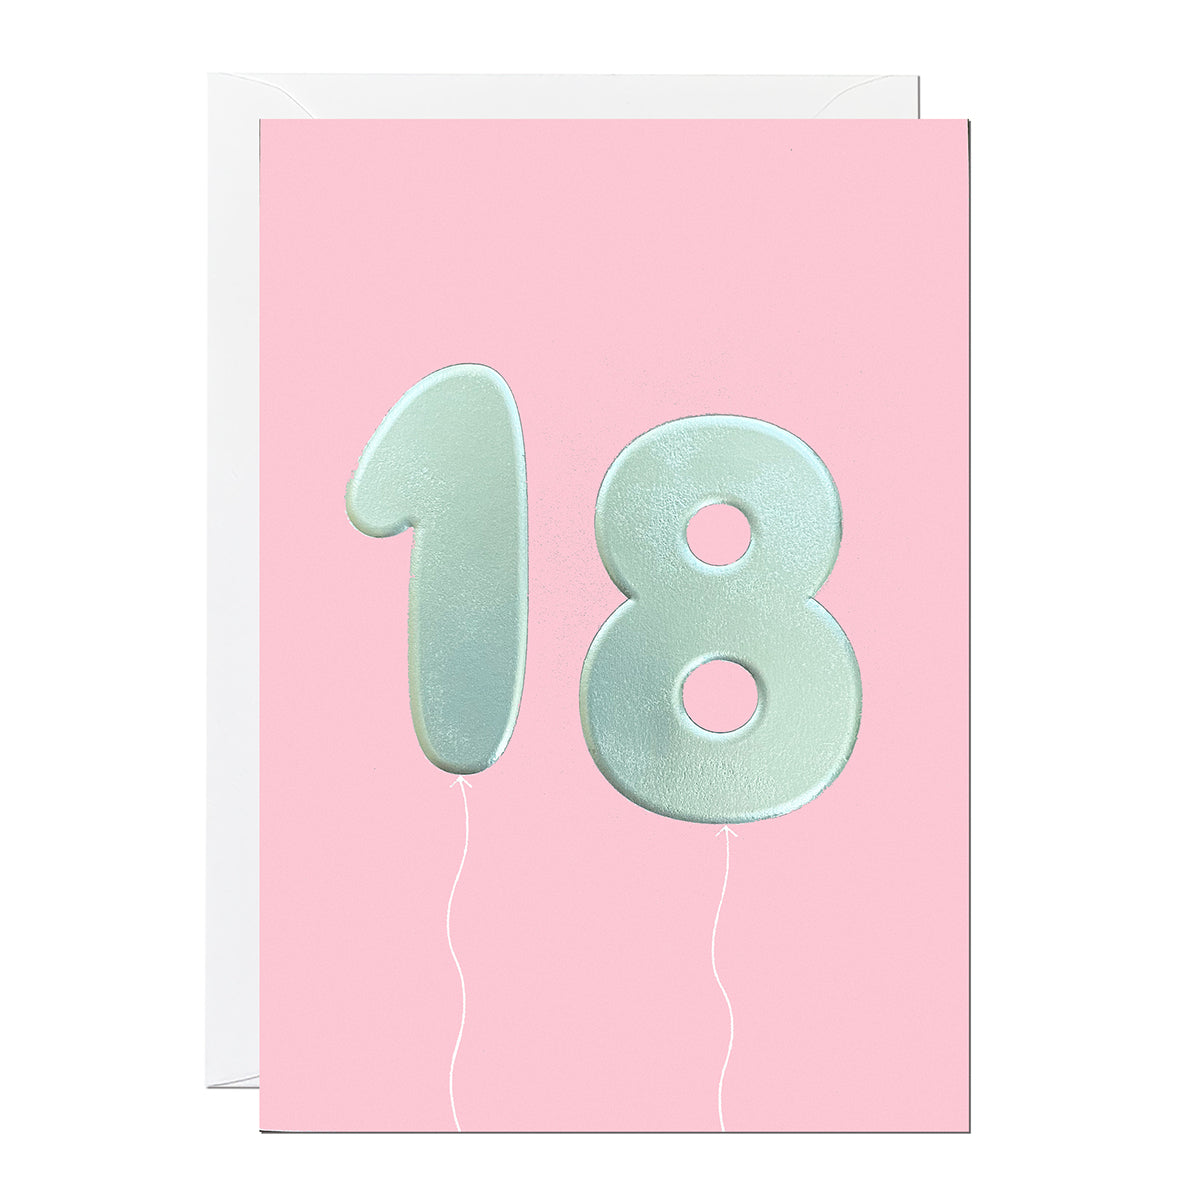 An 18th birthday card featuring big helium balloons printed with an embossed silver foil on a pink card.